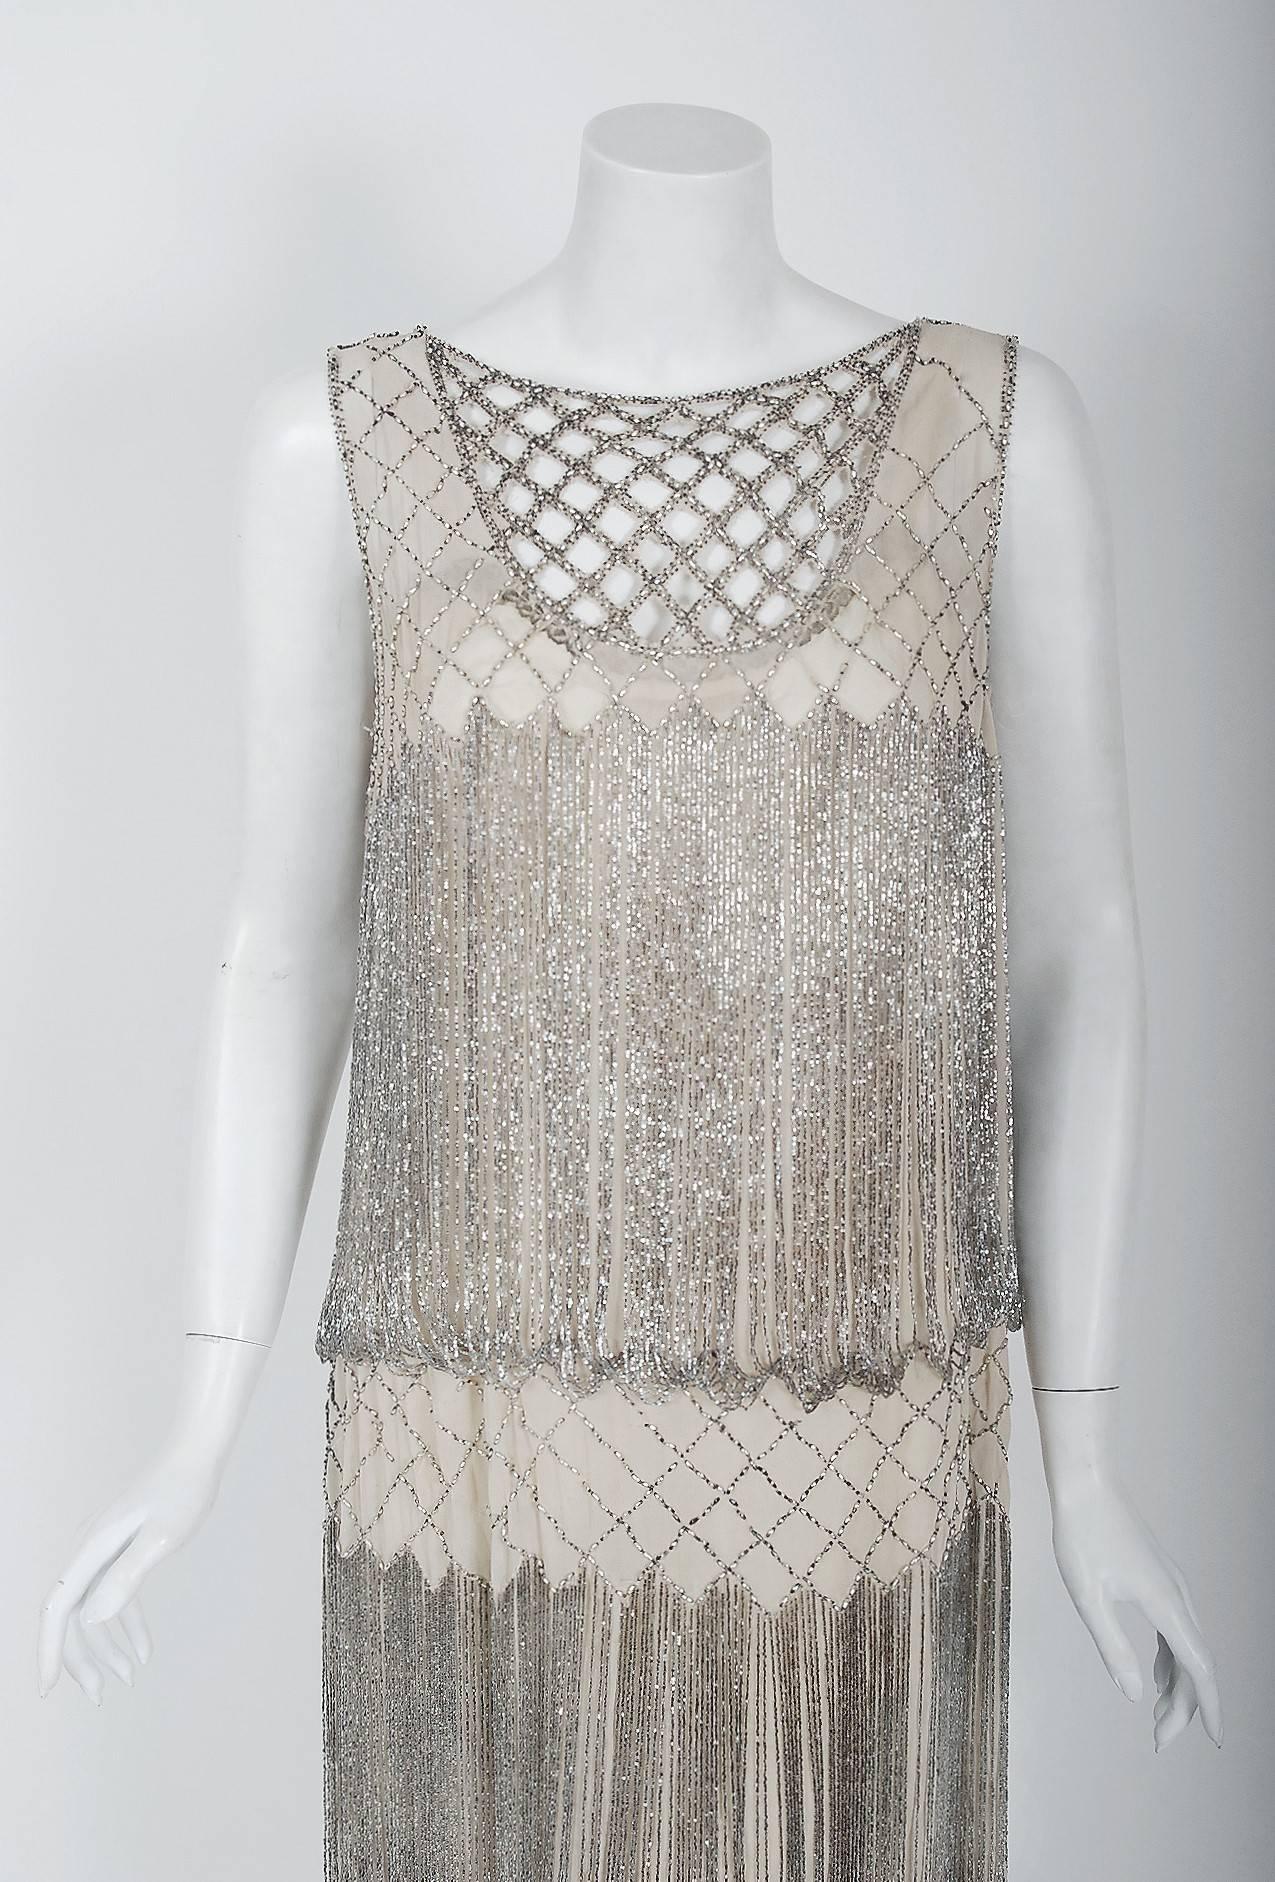 Romantic flapper dresses from the early 20th century are perennial favorites and this one is a show-stopper! The garment's simple unstructured style is so modern; the fine beadwork is a treasure trove of needle art. This beauty, fashioned from